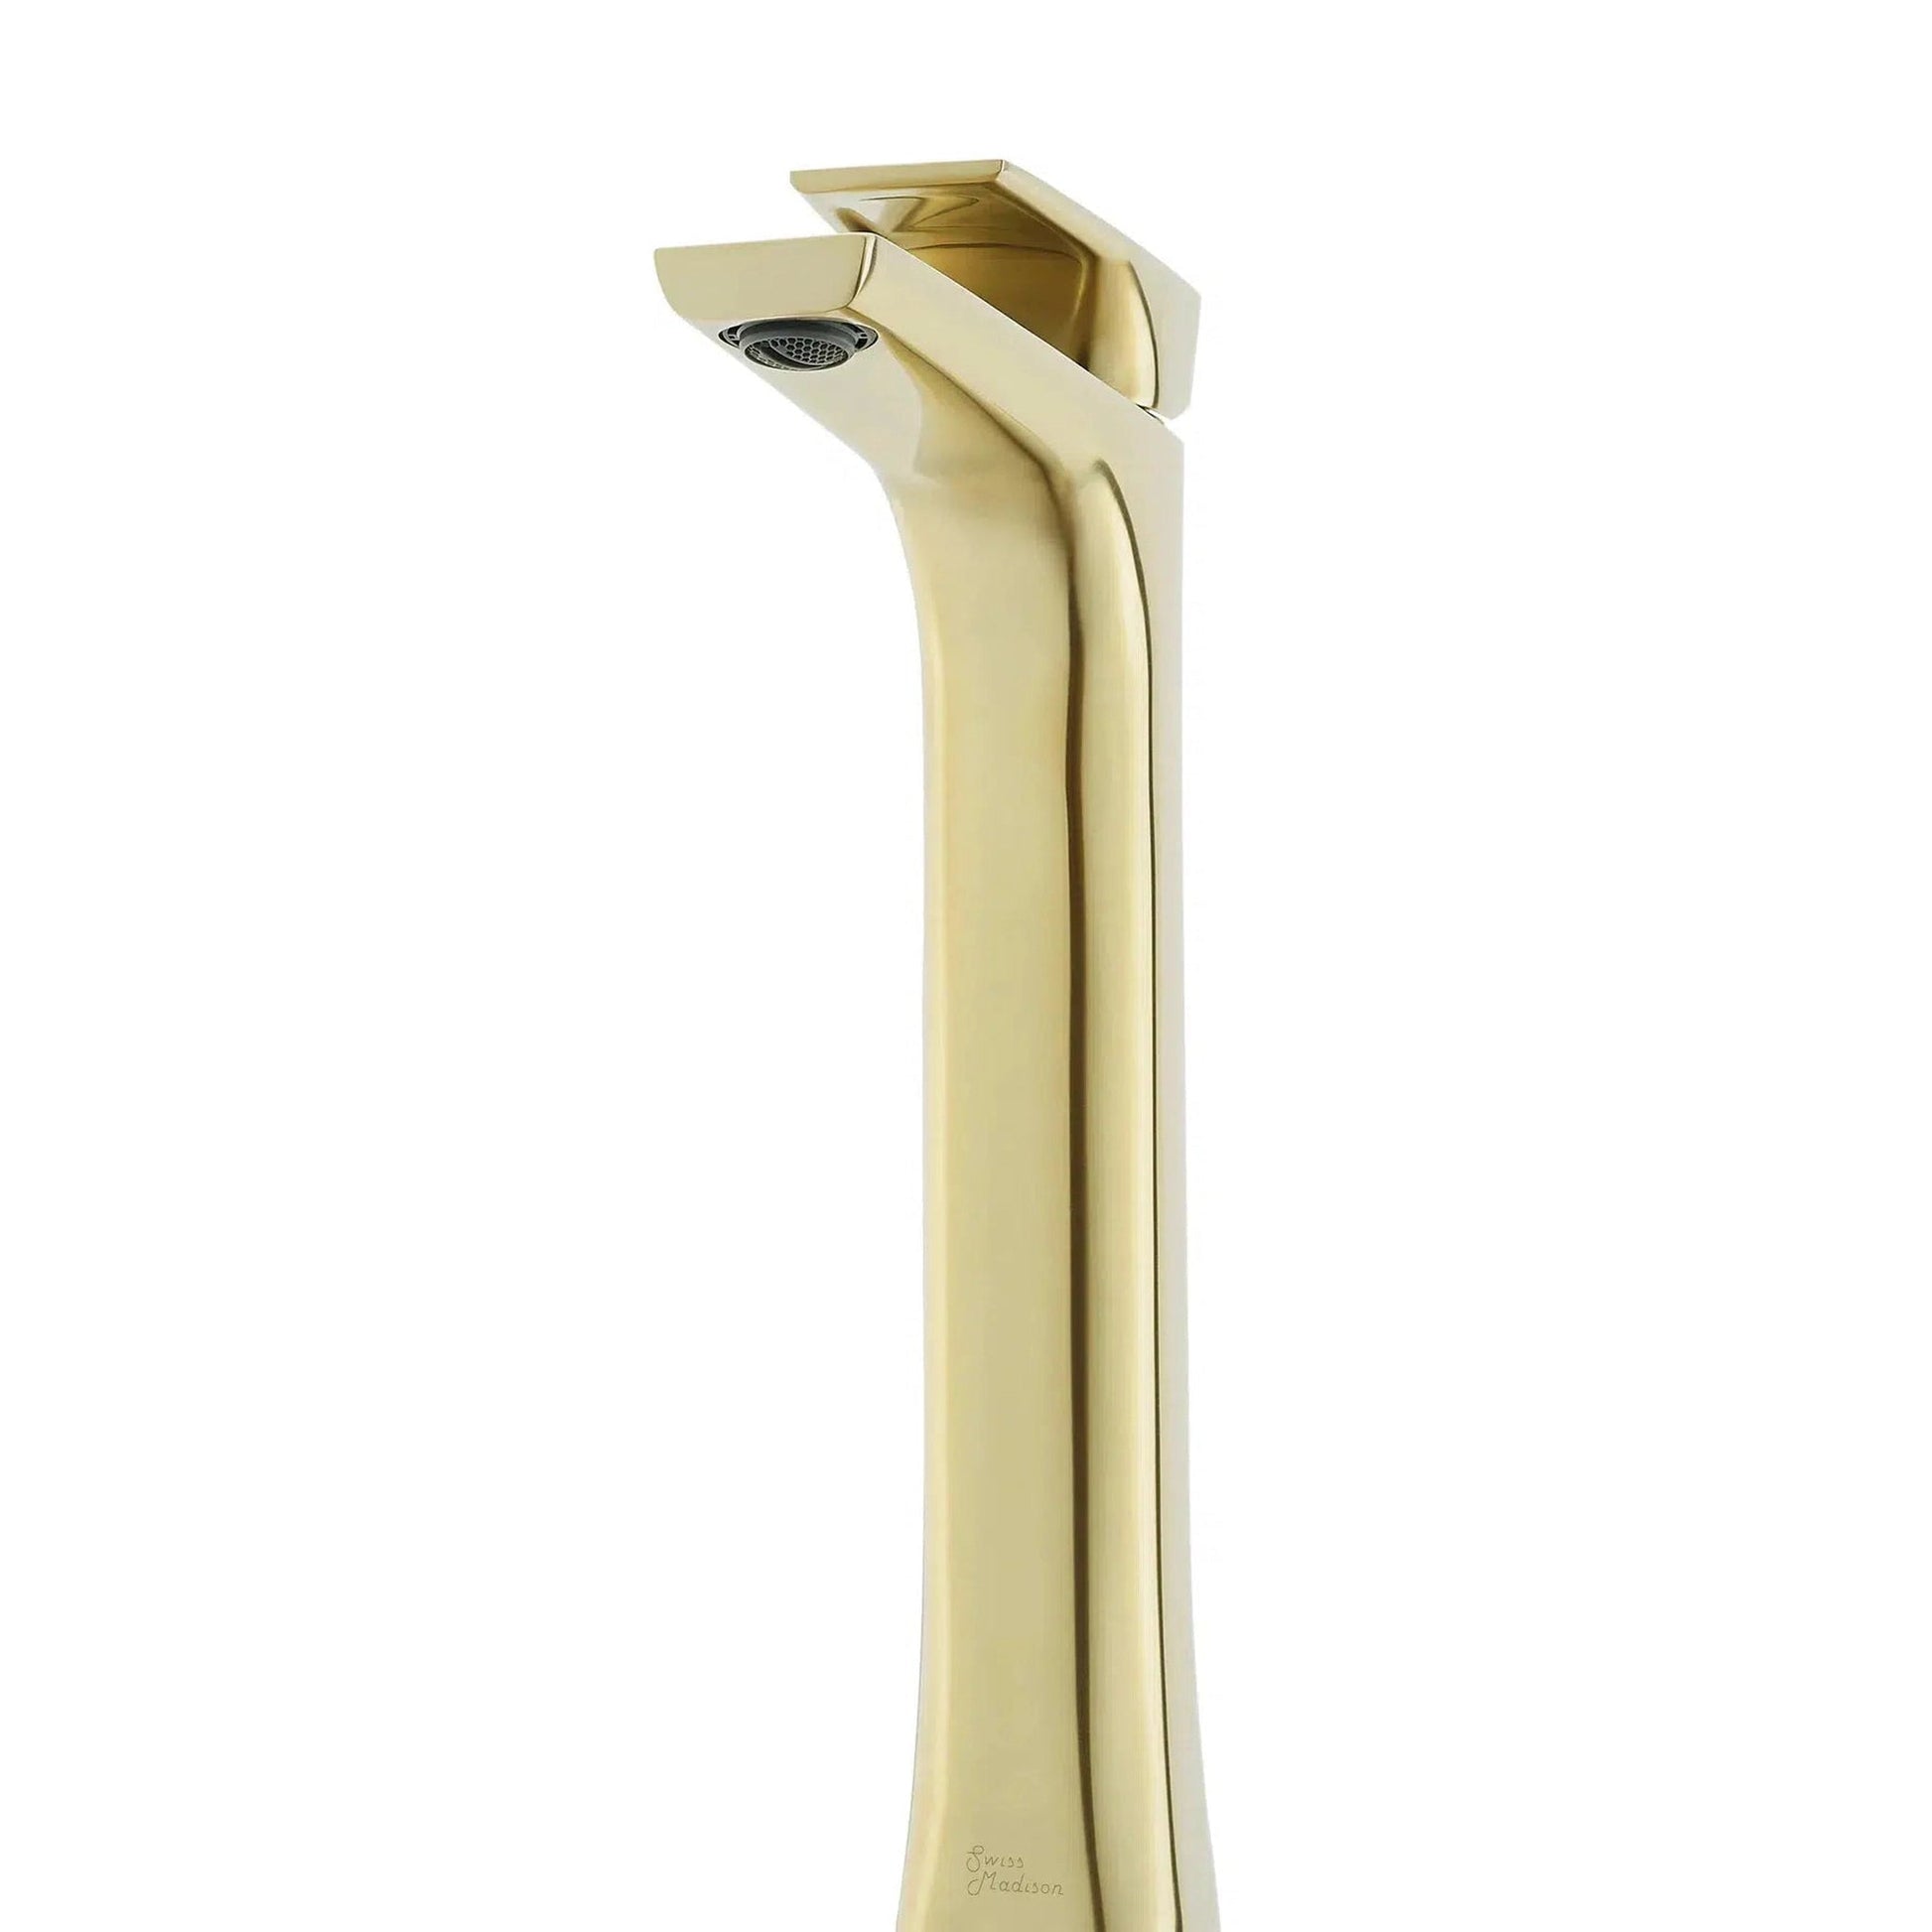 Swiss Madison Monaco 11" Brushed Gold Single Hole Bathroom Faucet With Flow Rate of 1.2 GPM